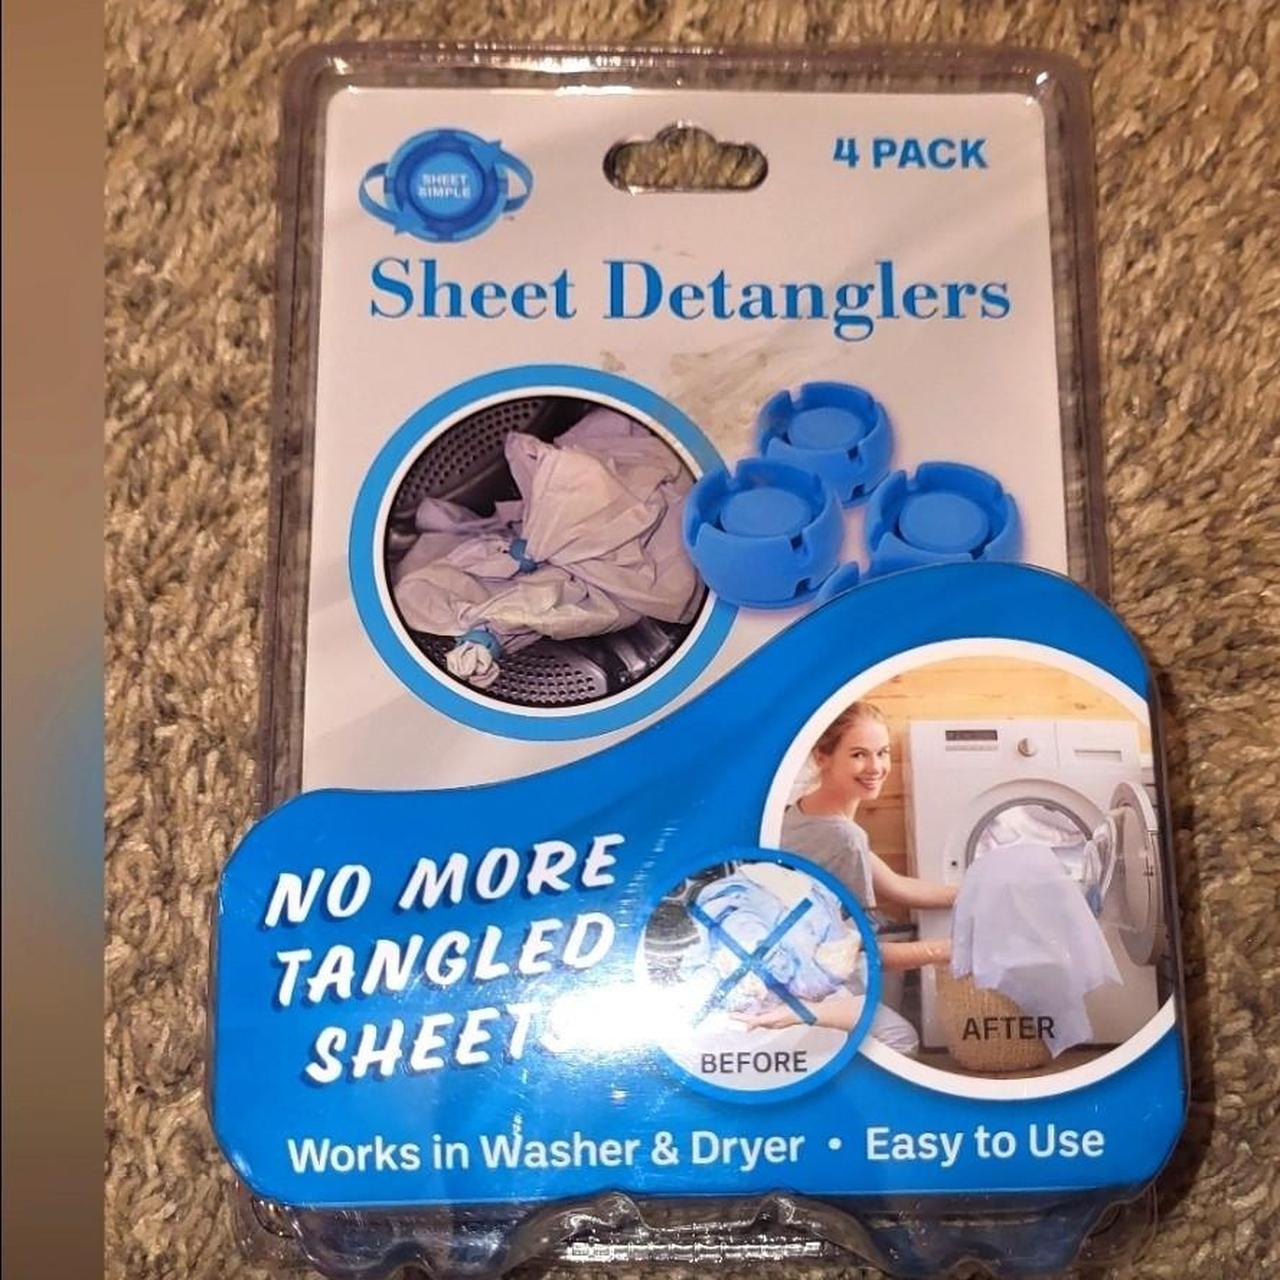 4 Pack)Washer & Dryer Bed Sheet Detangler Prevents Laundry Tangles and Wads